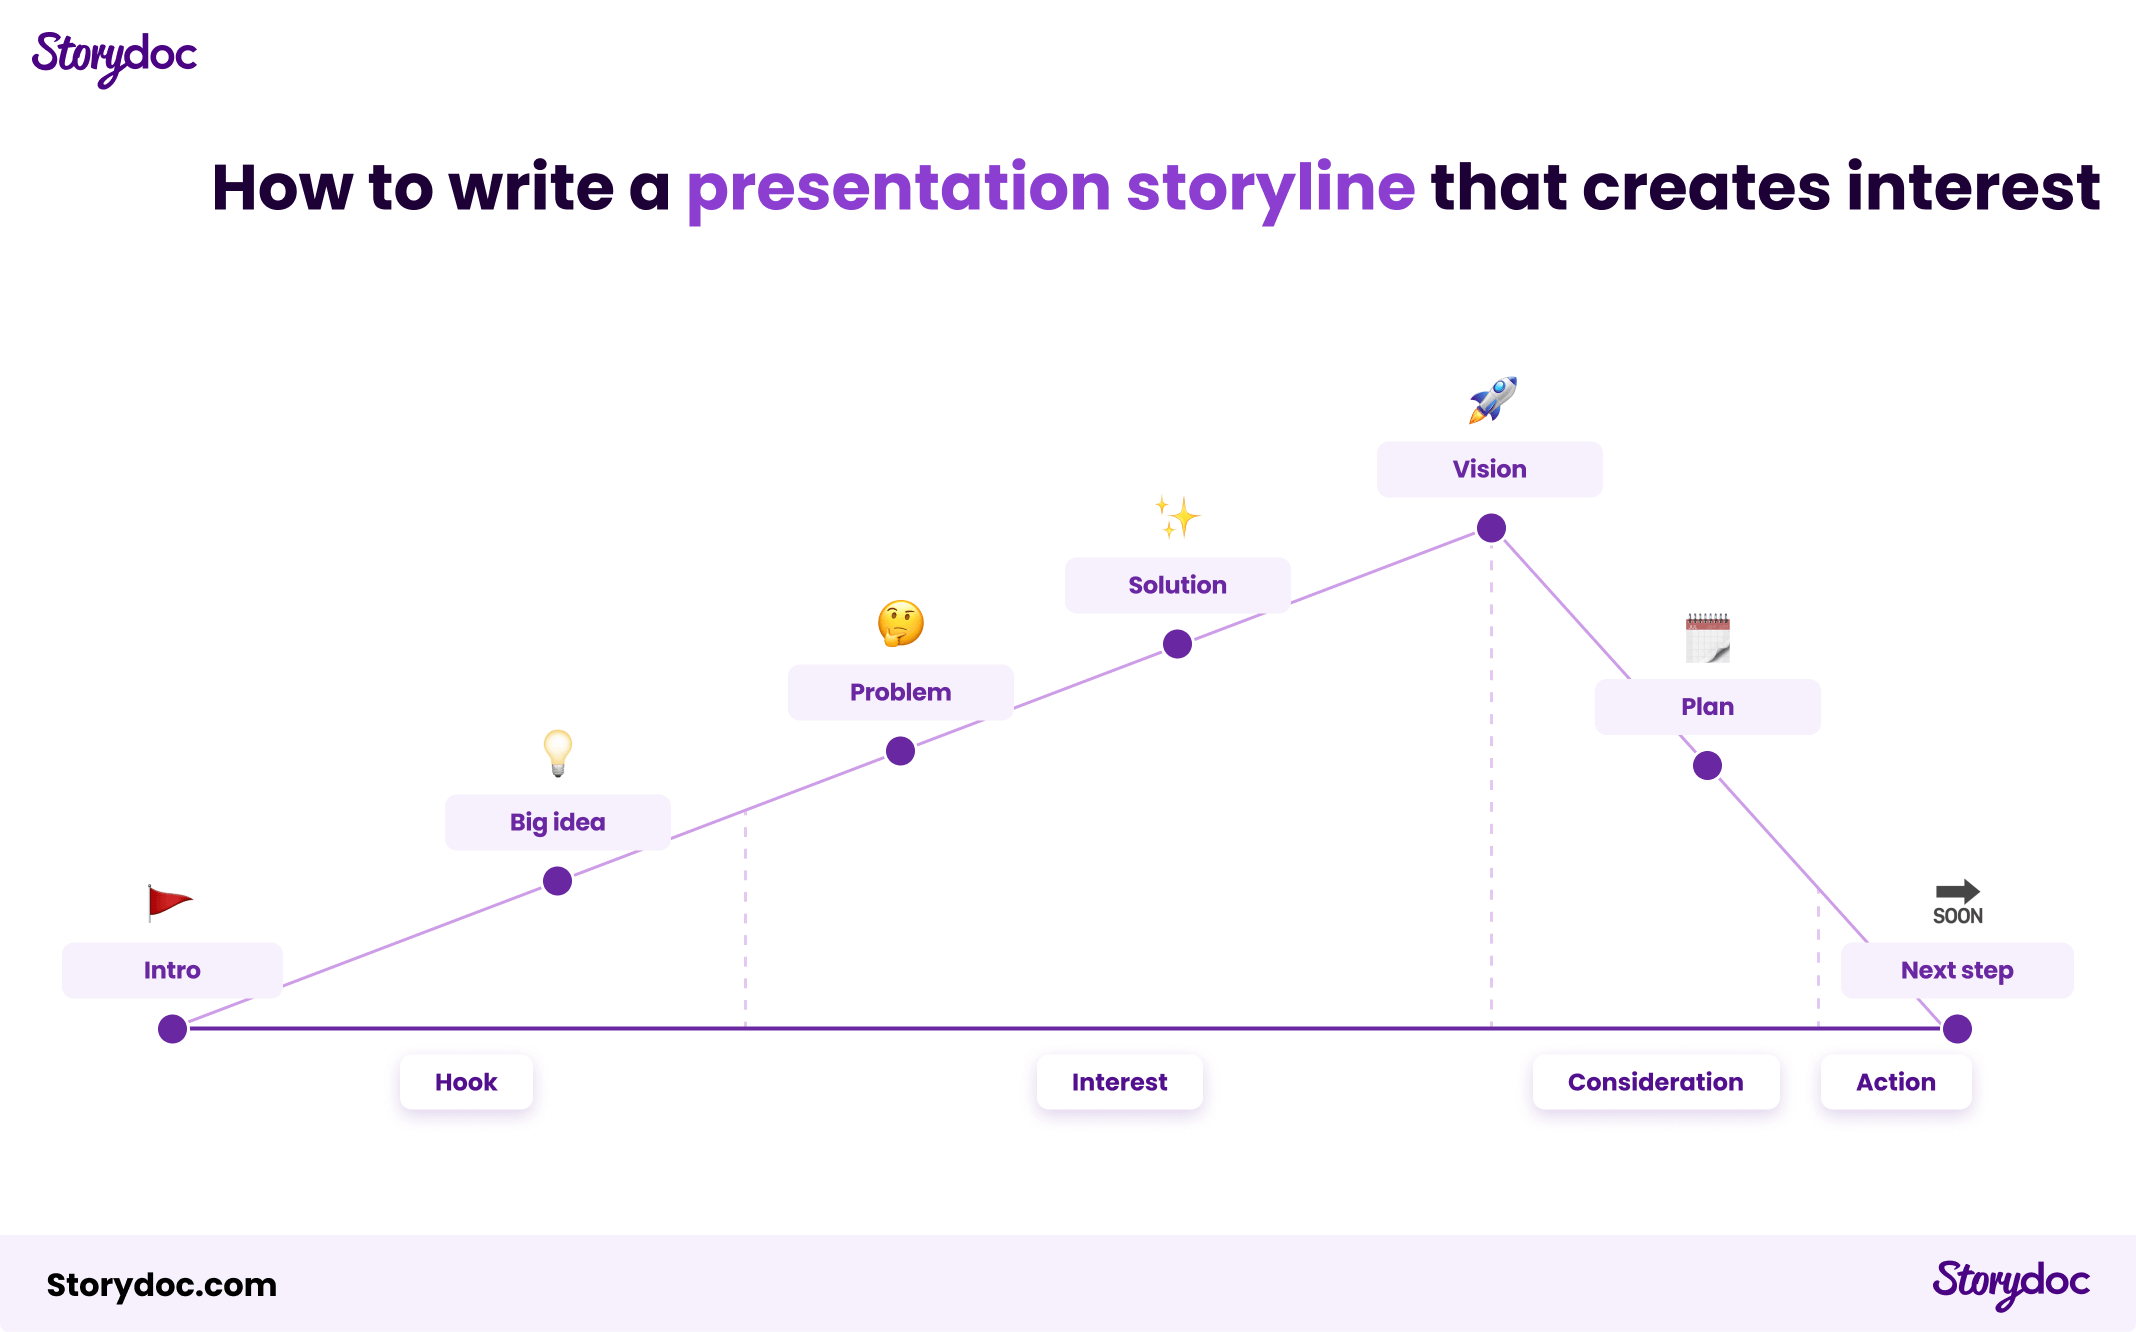 How to write a case study storyline that creates interest